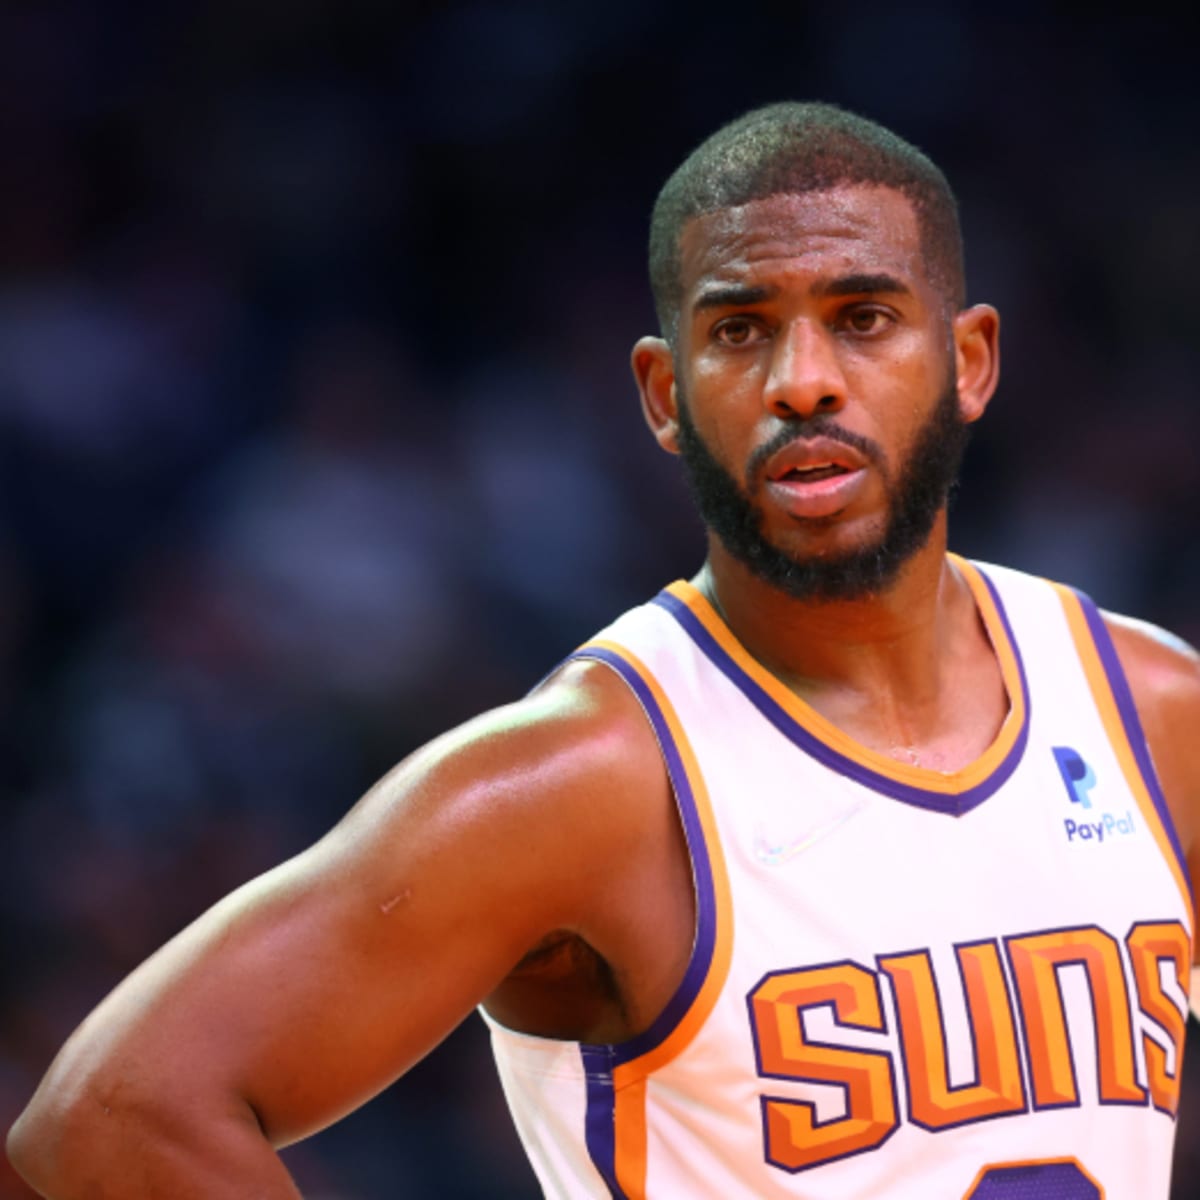 Over his career, when Chris Paul plays, his team's winning